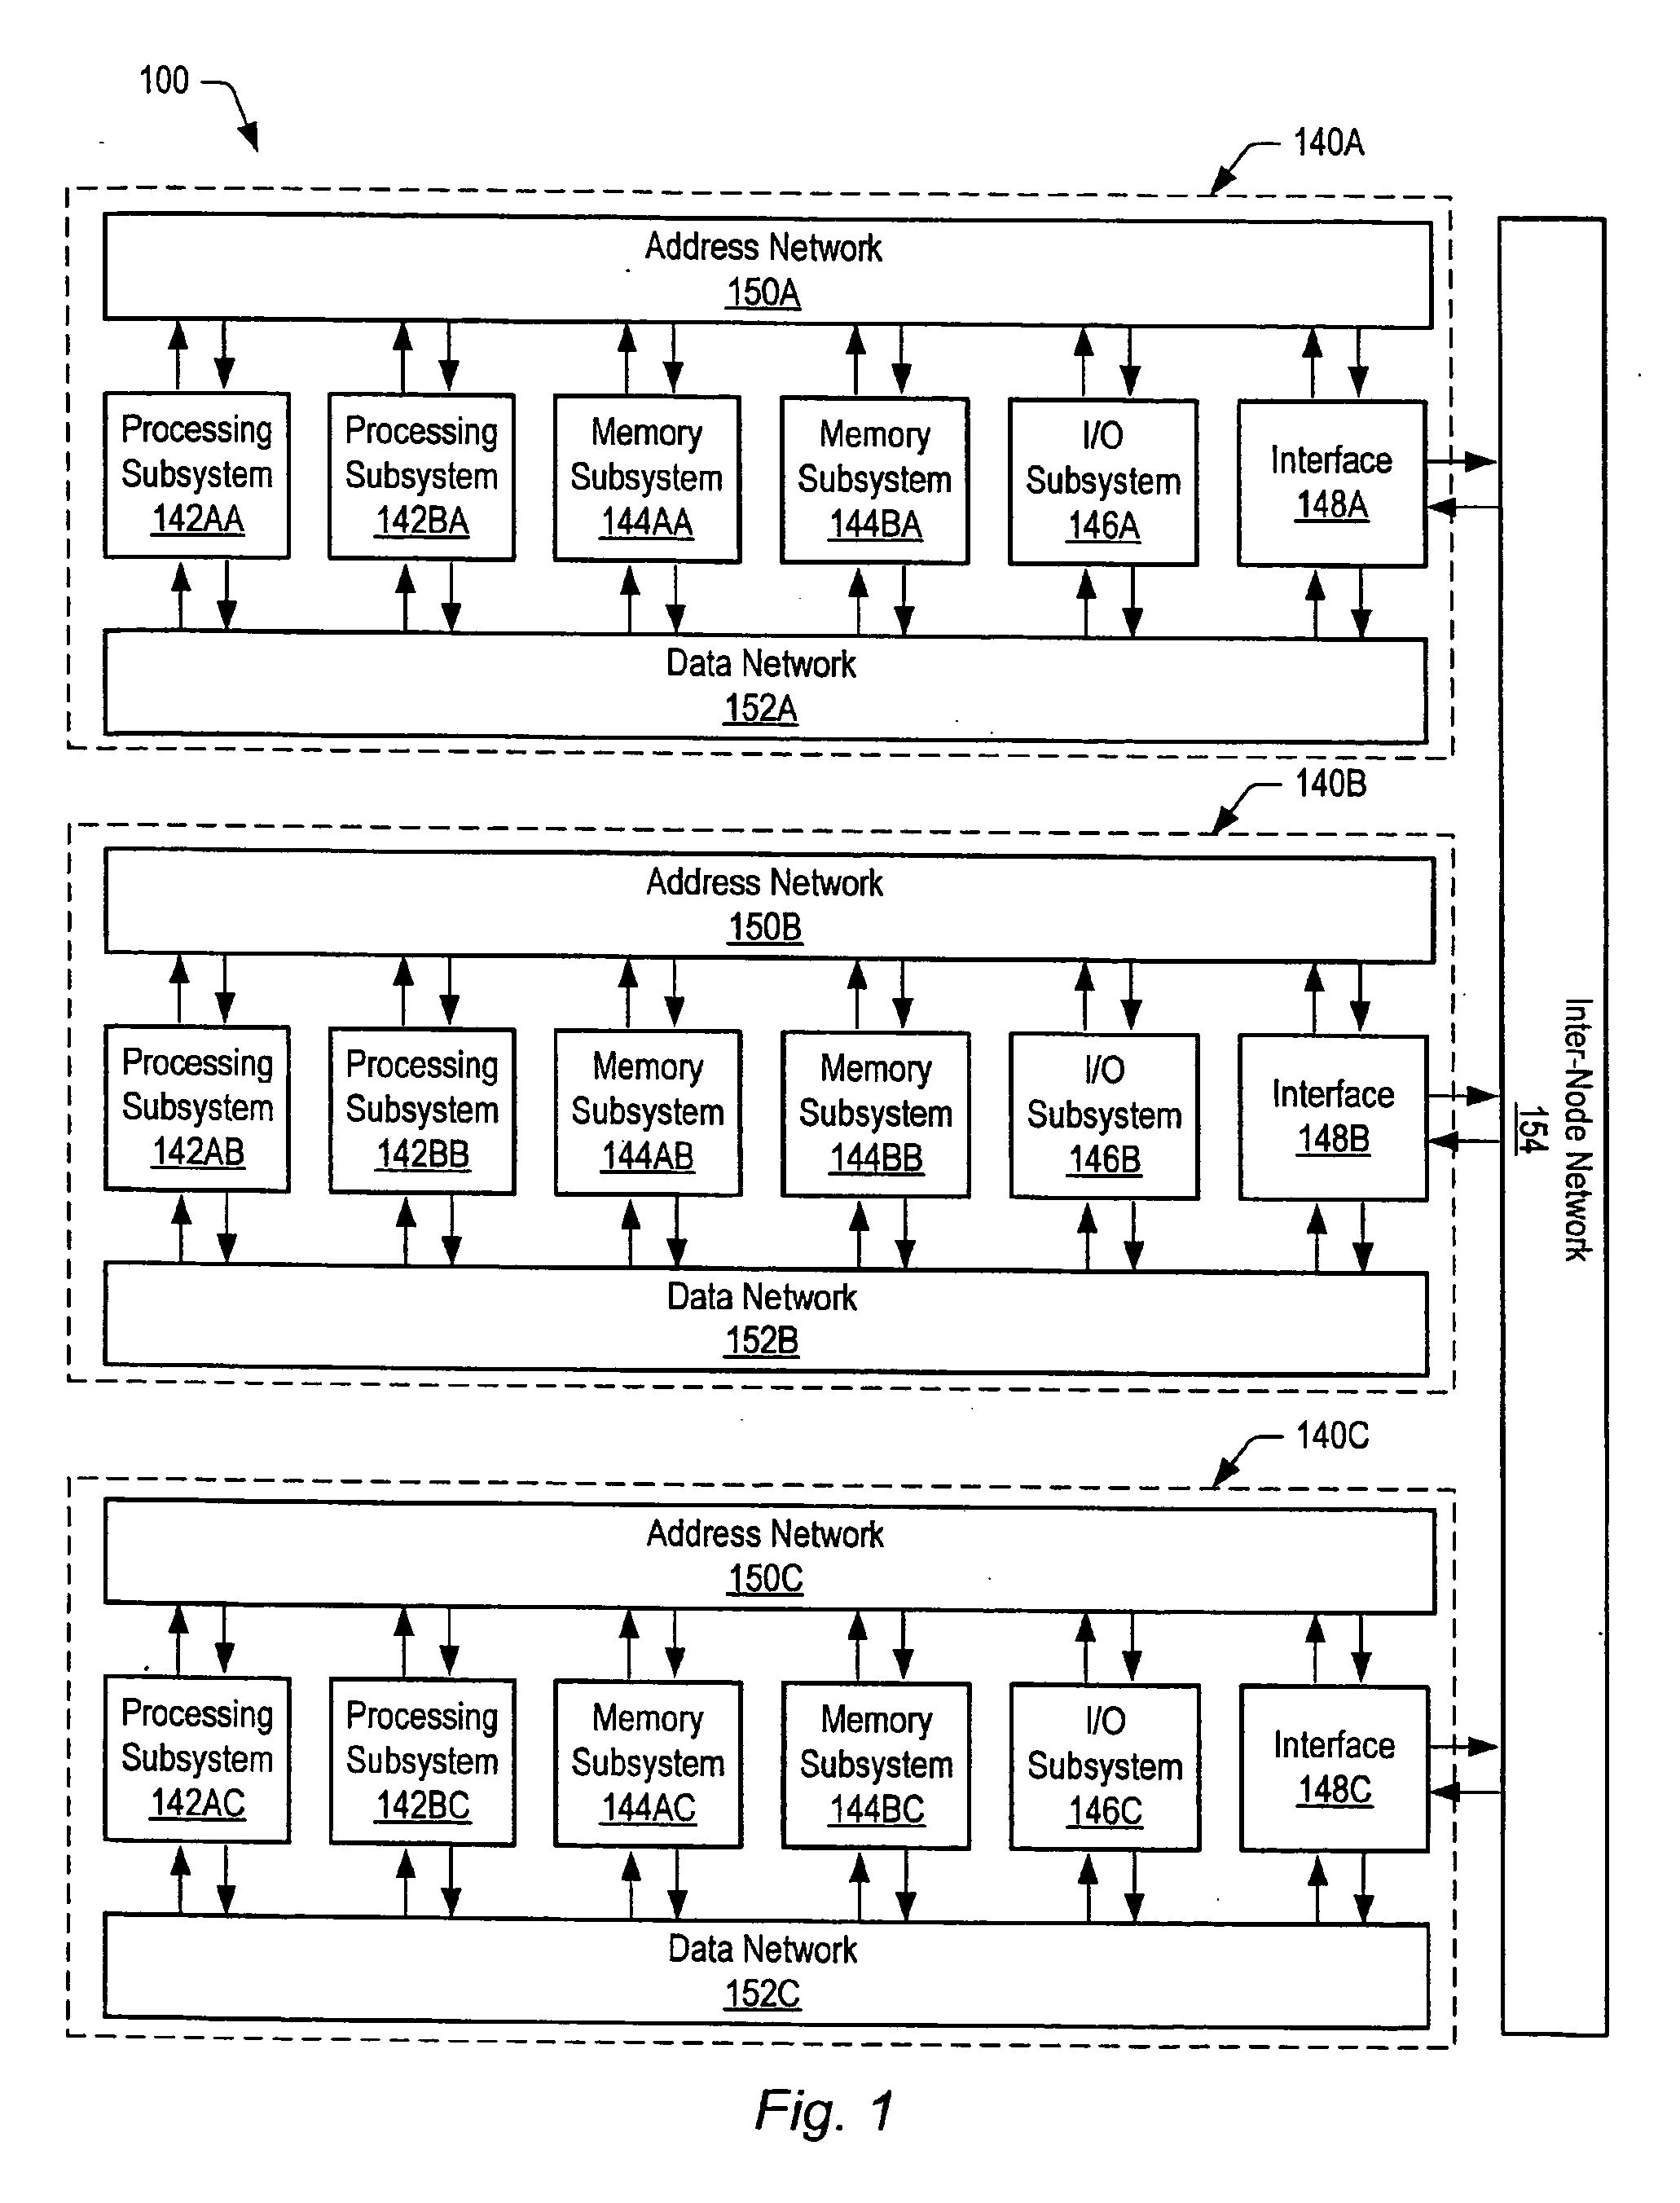 Multi-node system in which home memory subsystem stores global to local address translation information for replicating nodes